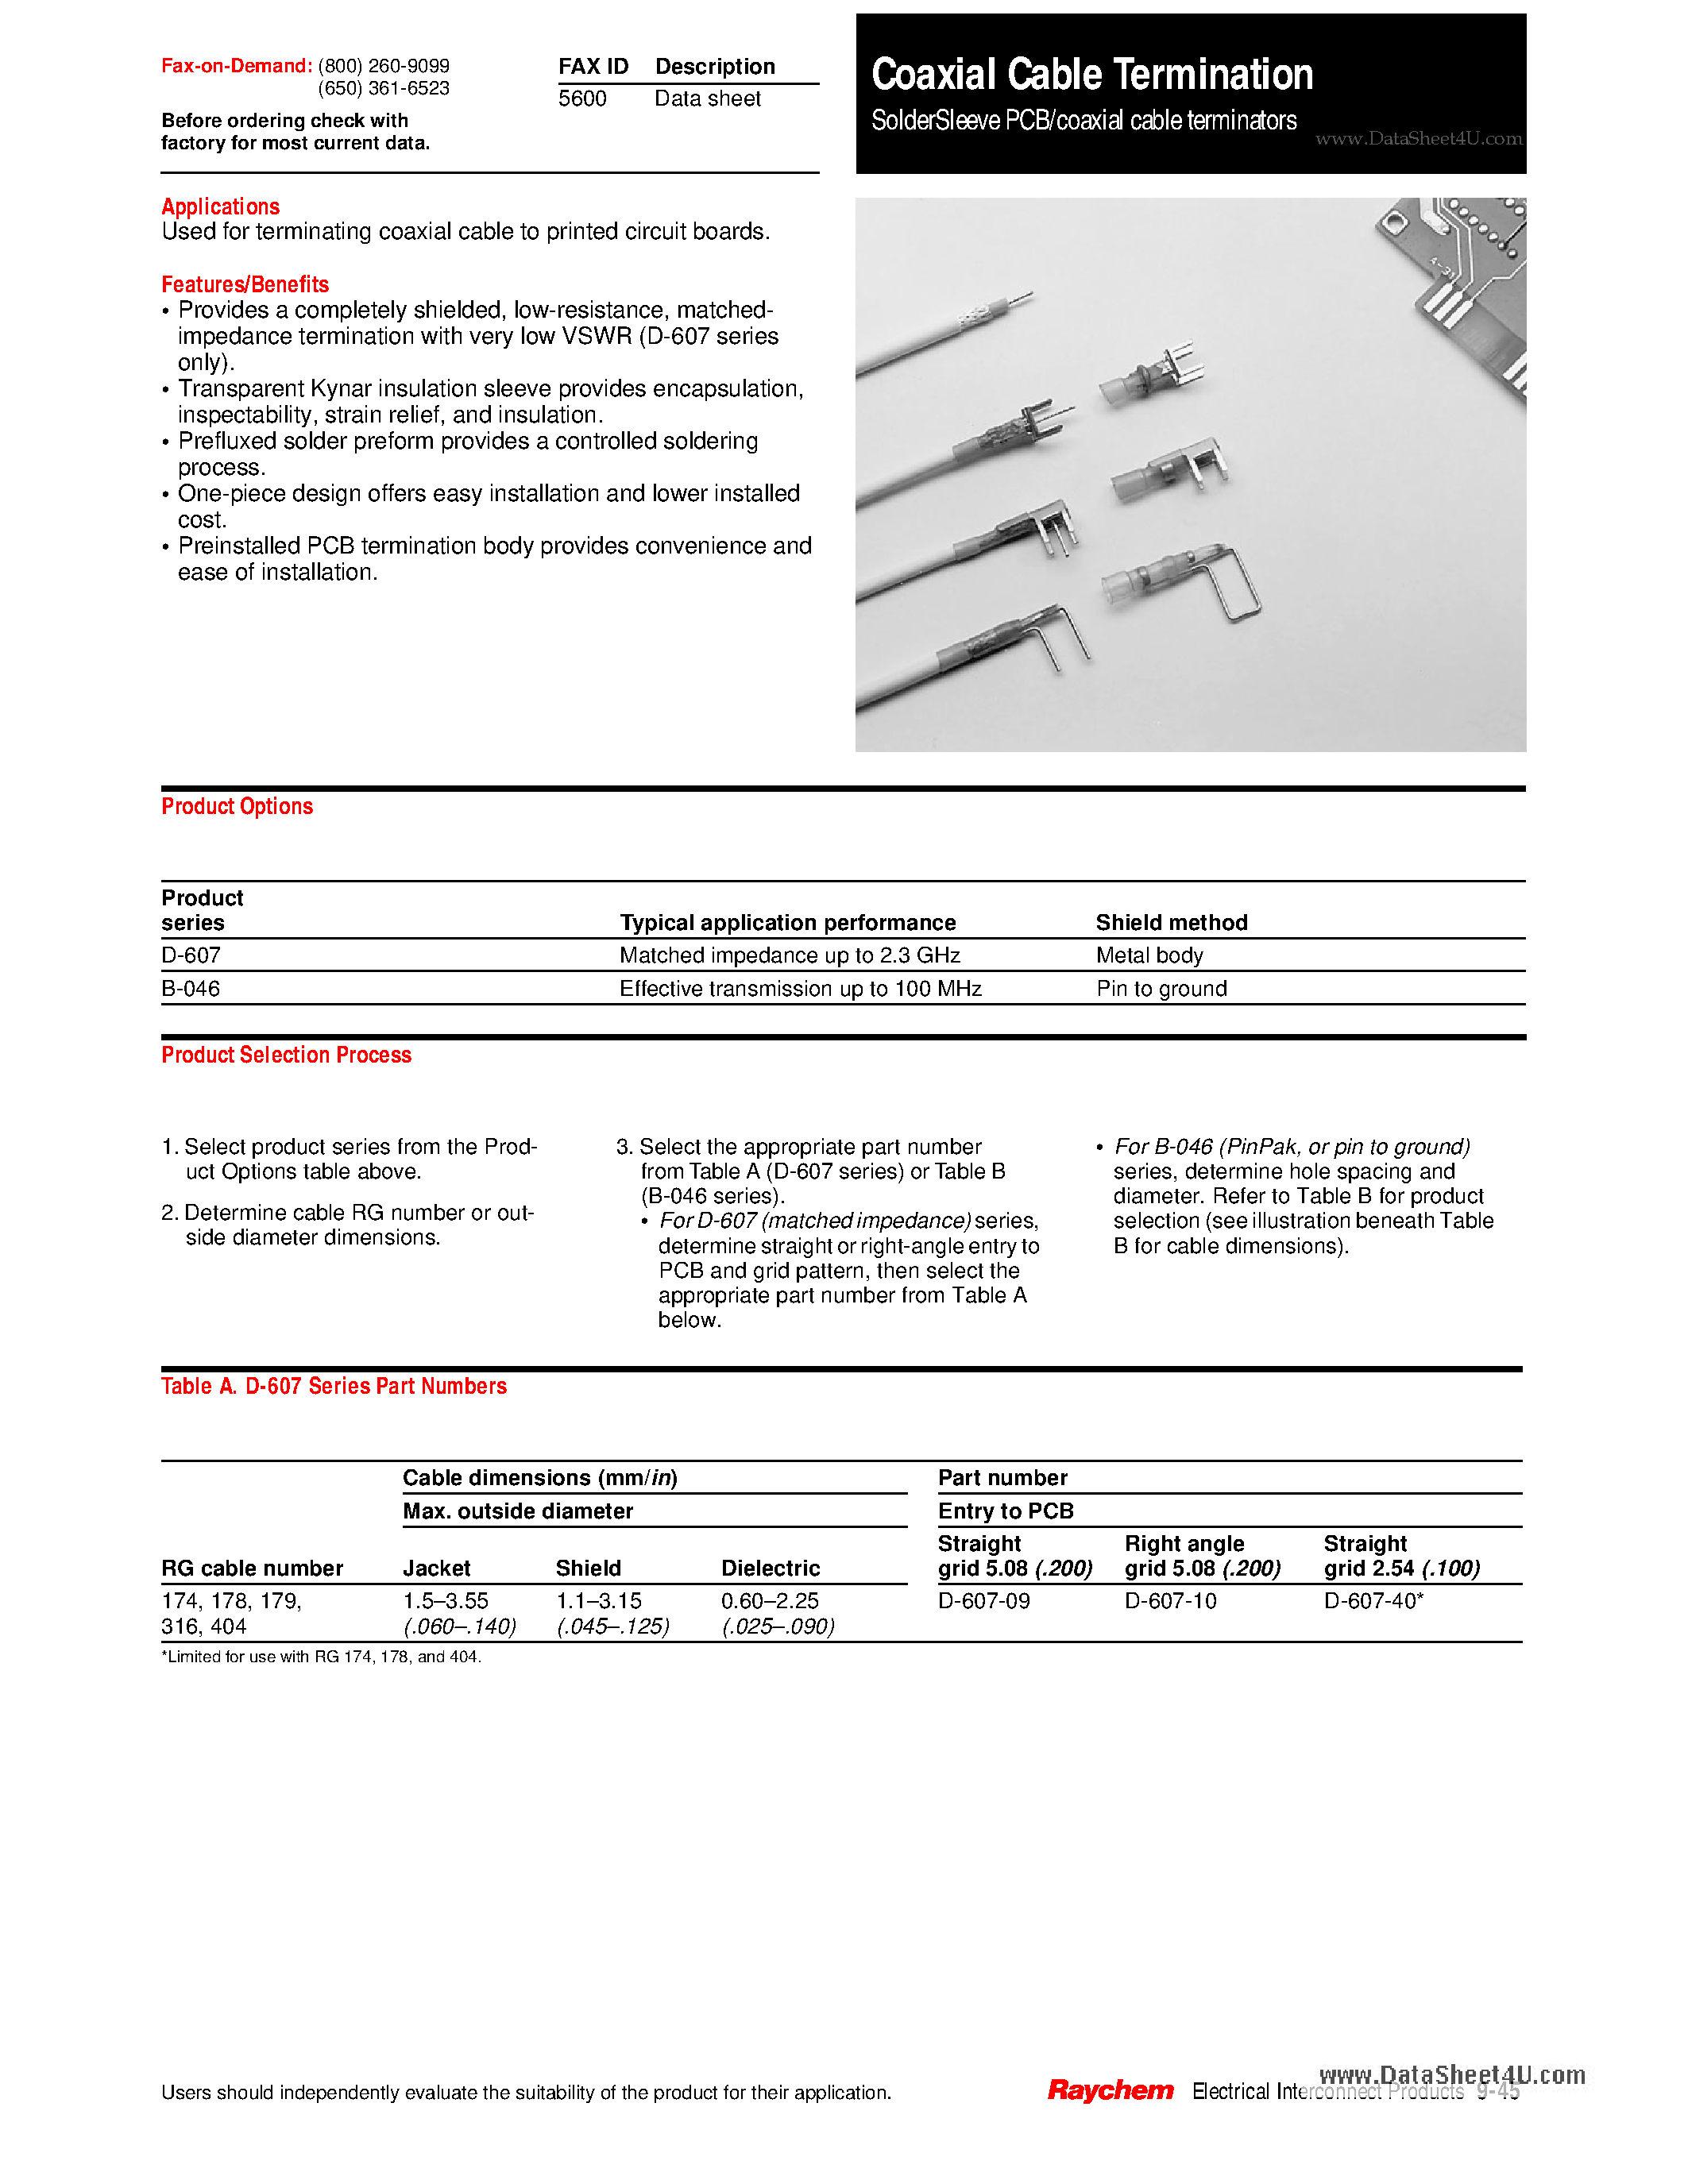 Datasheet D-607-09 - Coaxial Cable Termination page 1